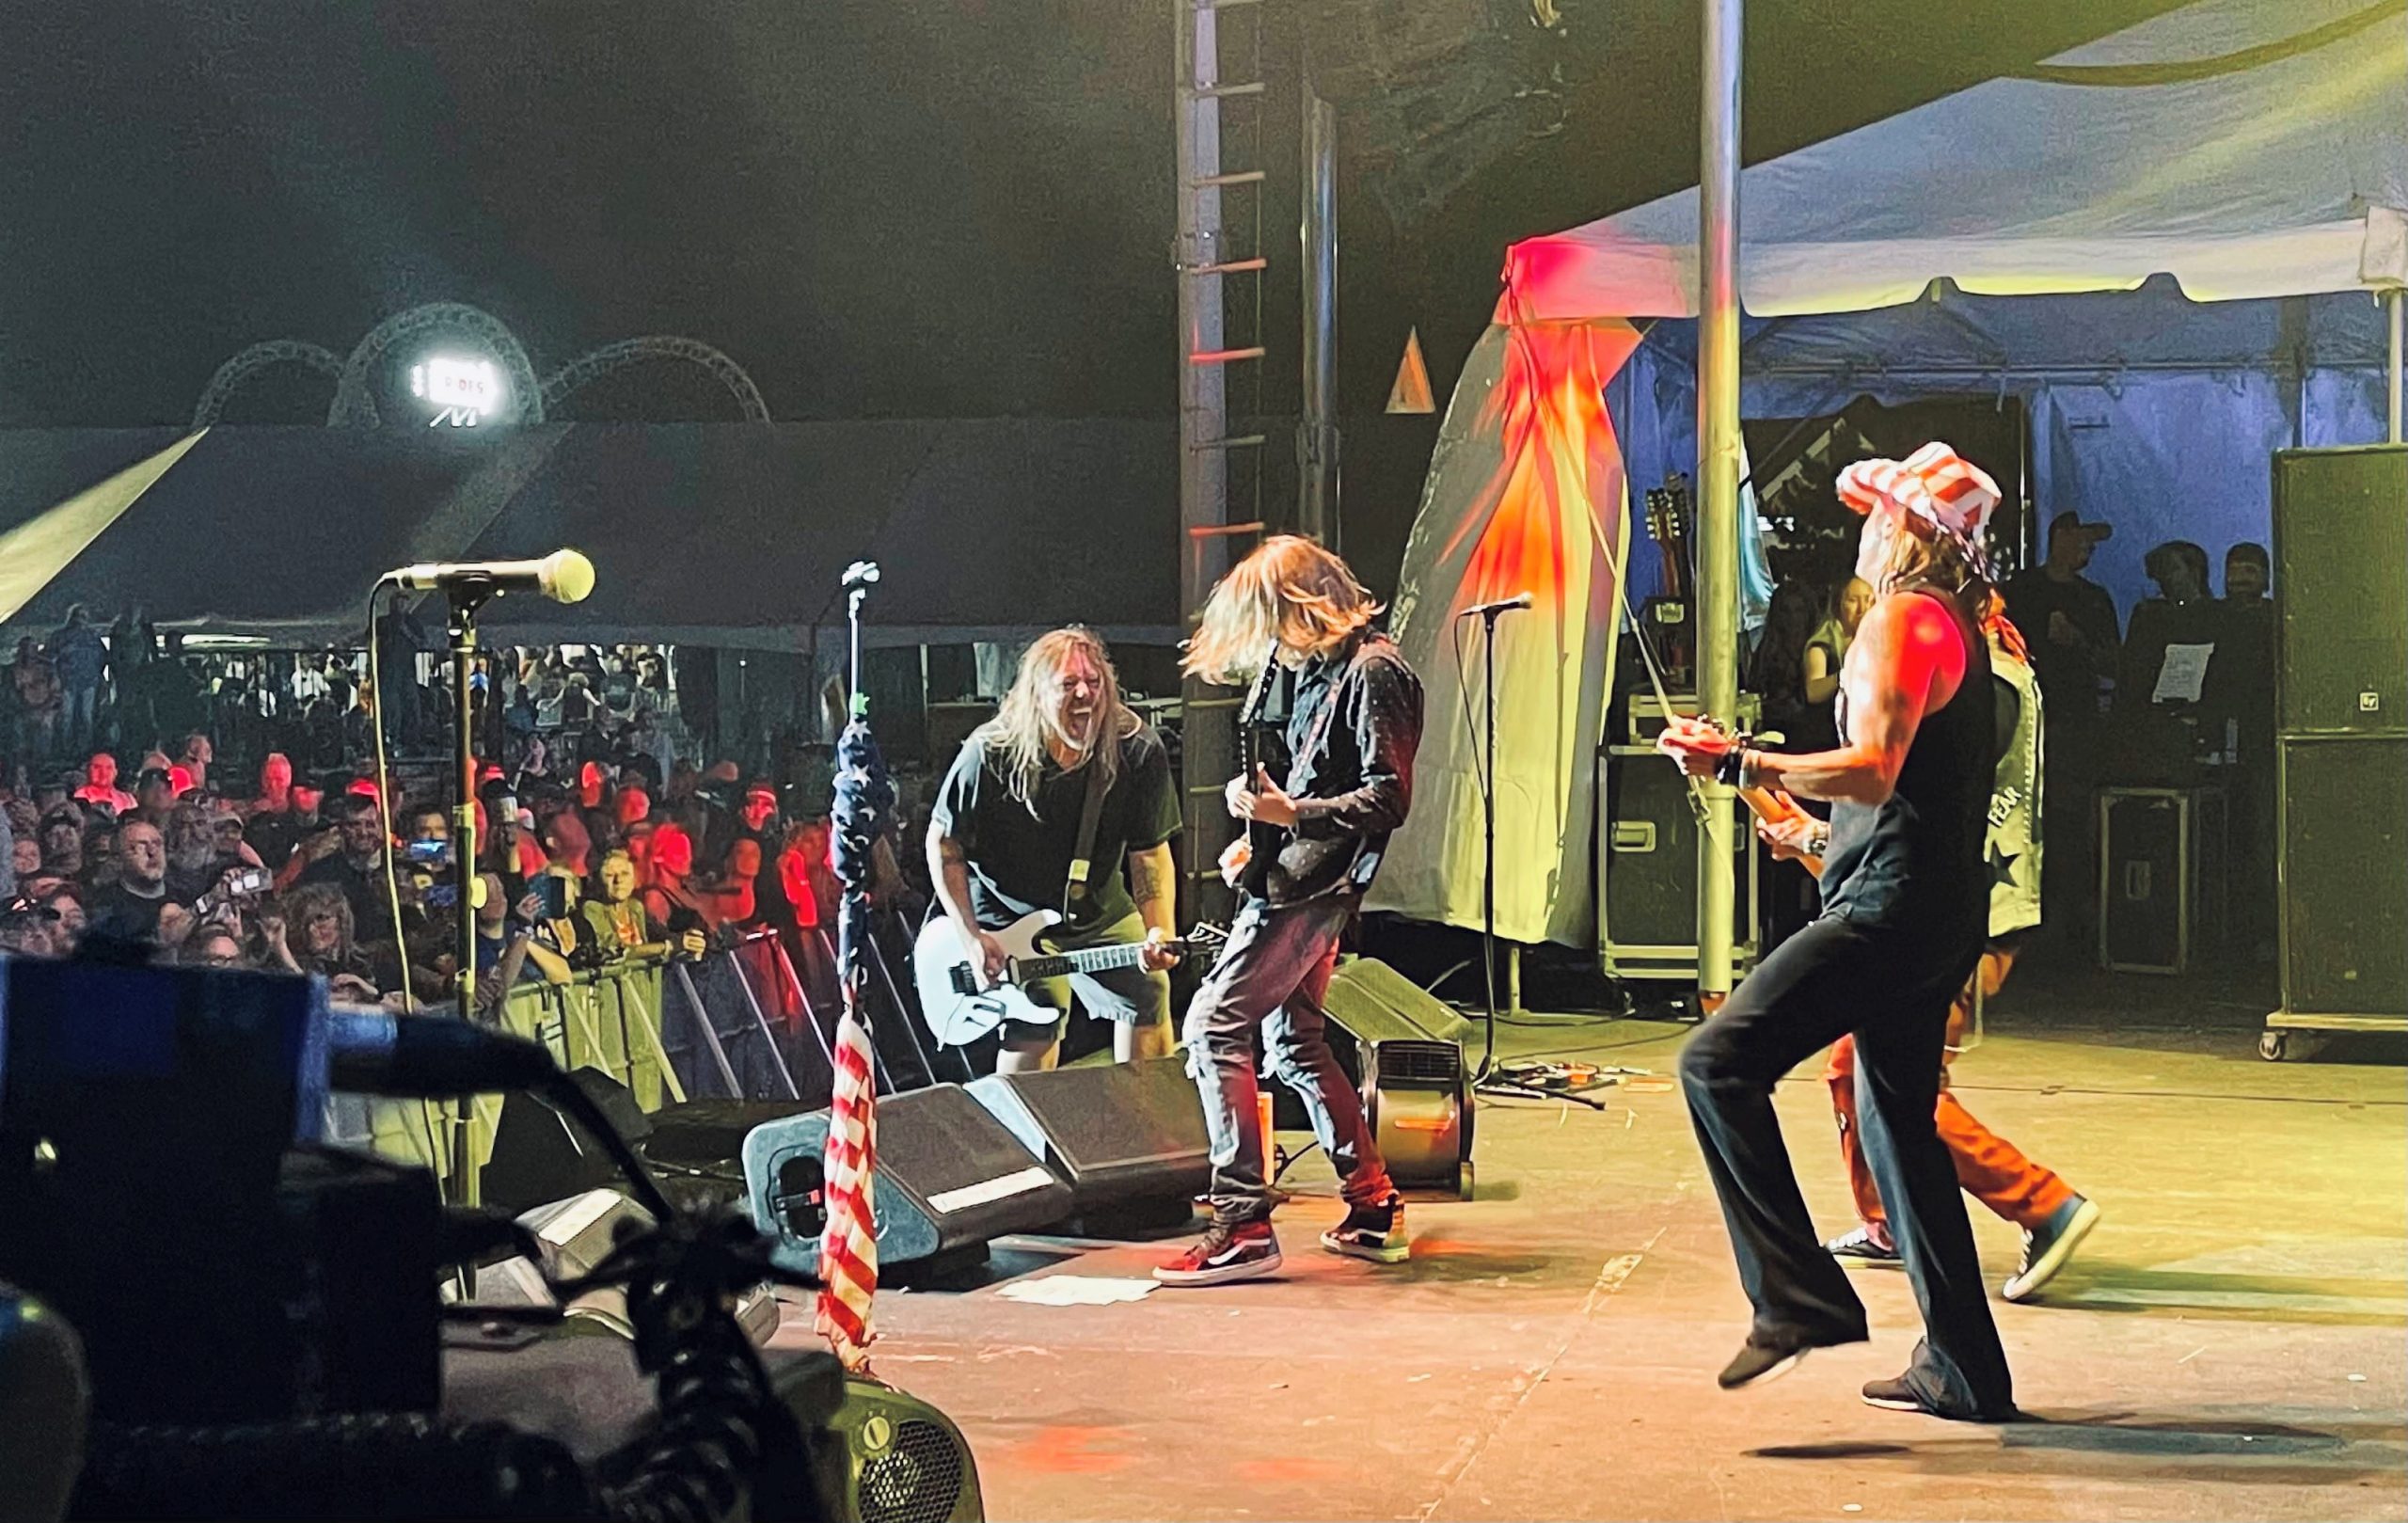 Local teenager played with Bret Michaels before 18,000 at BikeFest